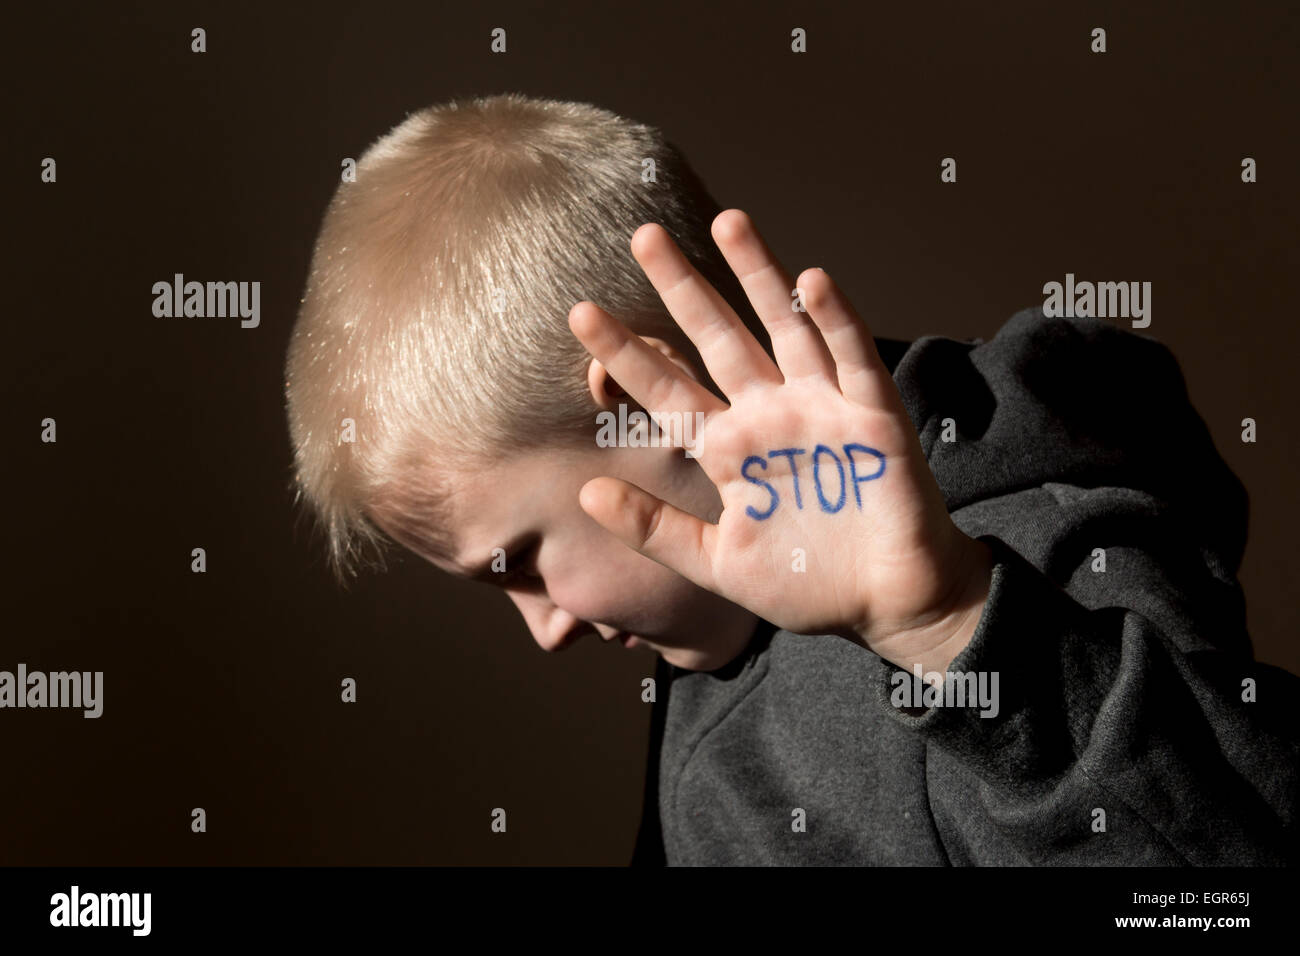 Upset abused frightened little child (boy), stop hand jesture close up horizontal dark portrait with copy space Stock Photo